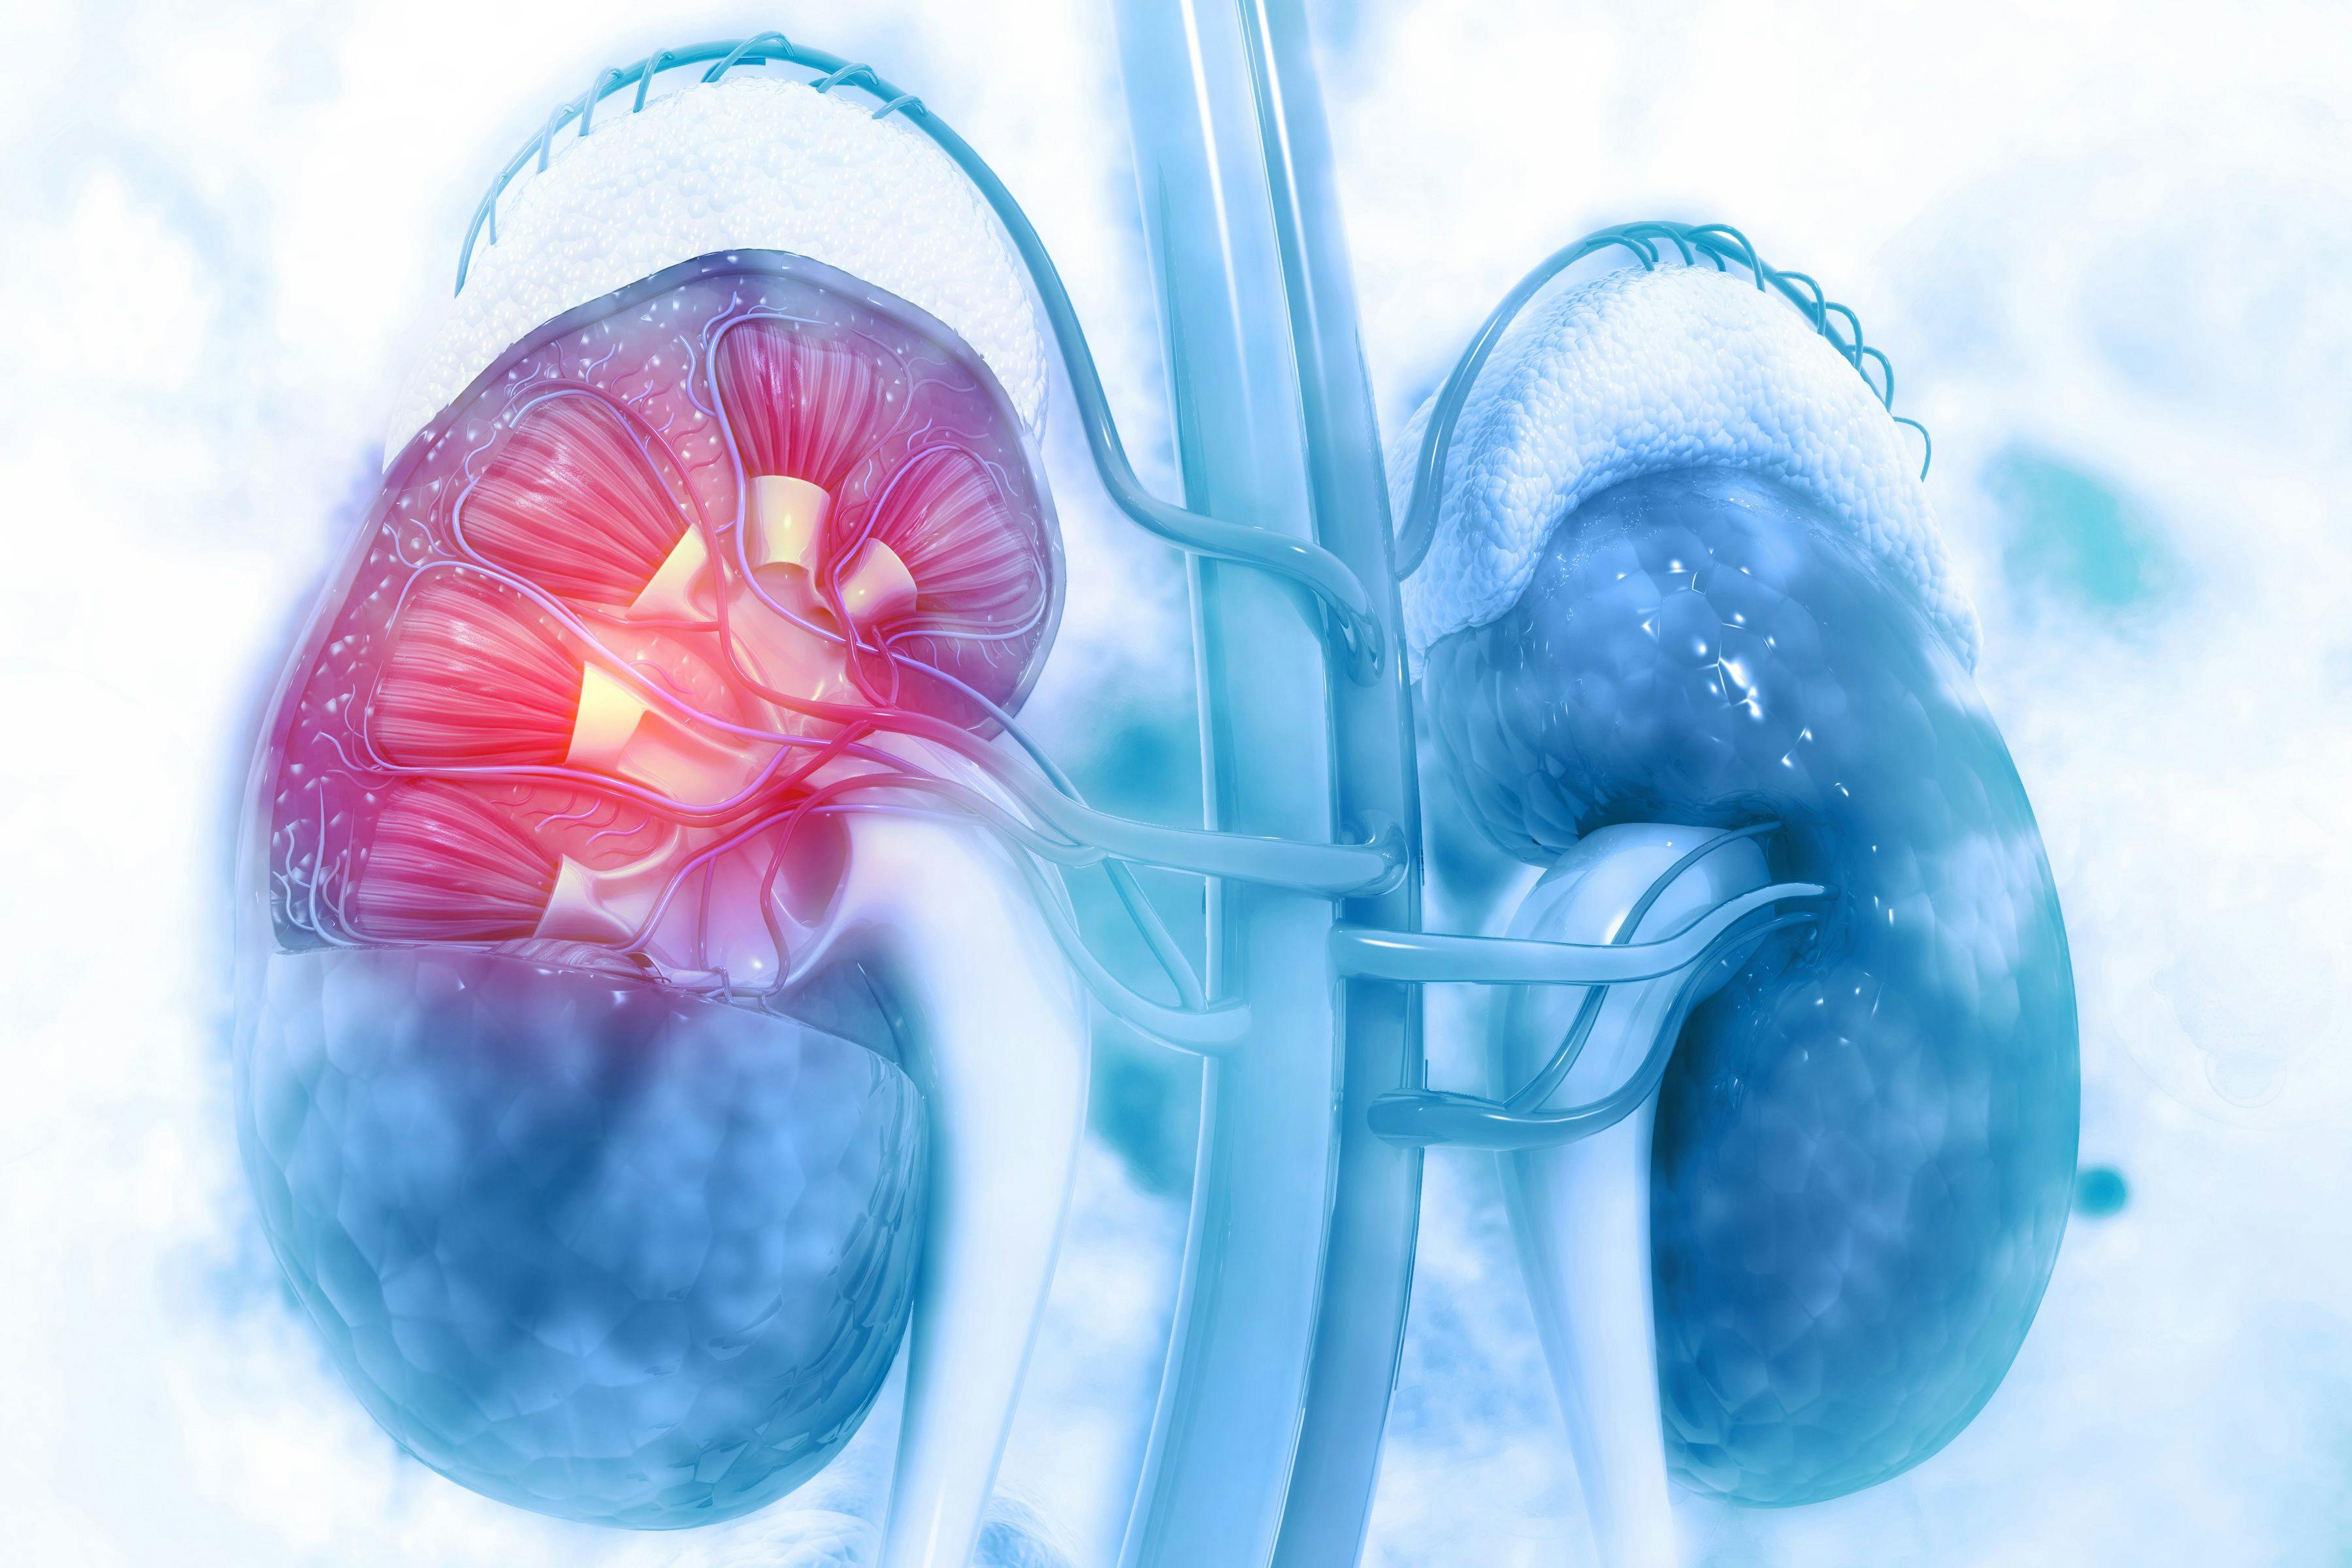 A priority review to a biologics license application has been granted by the FDA for adjuvant pembrolizumab in certain populations of patients with renal cell carcinoma who have undergone surgery.